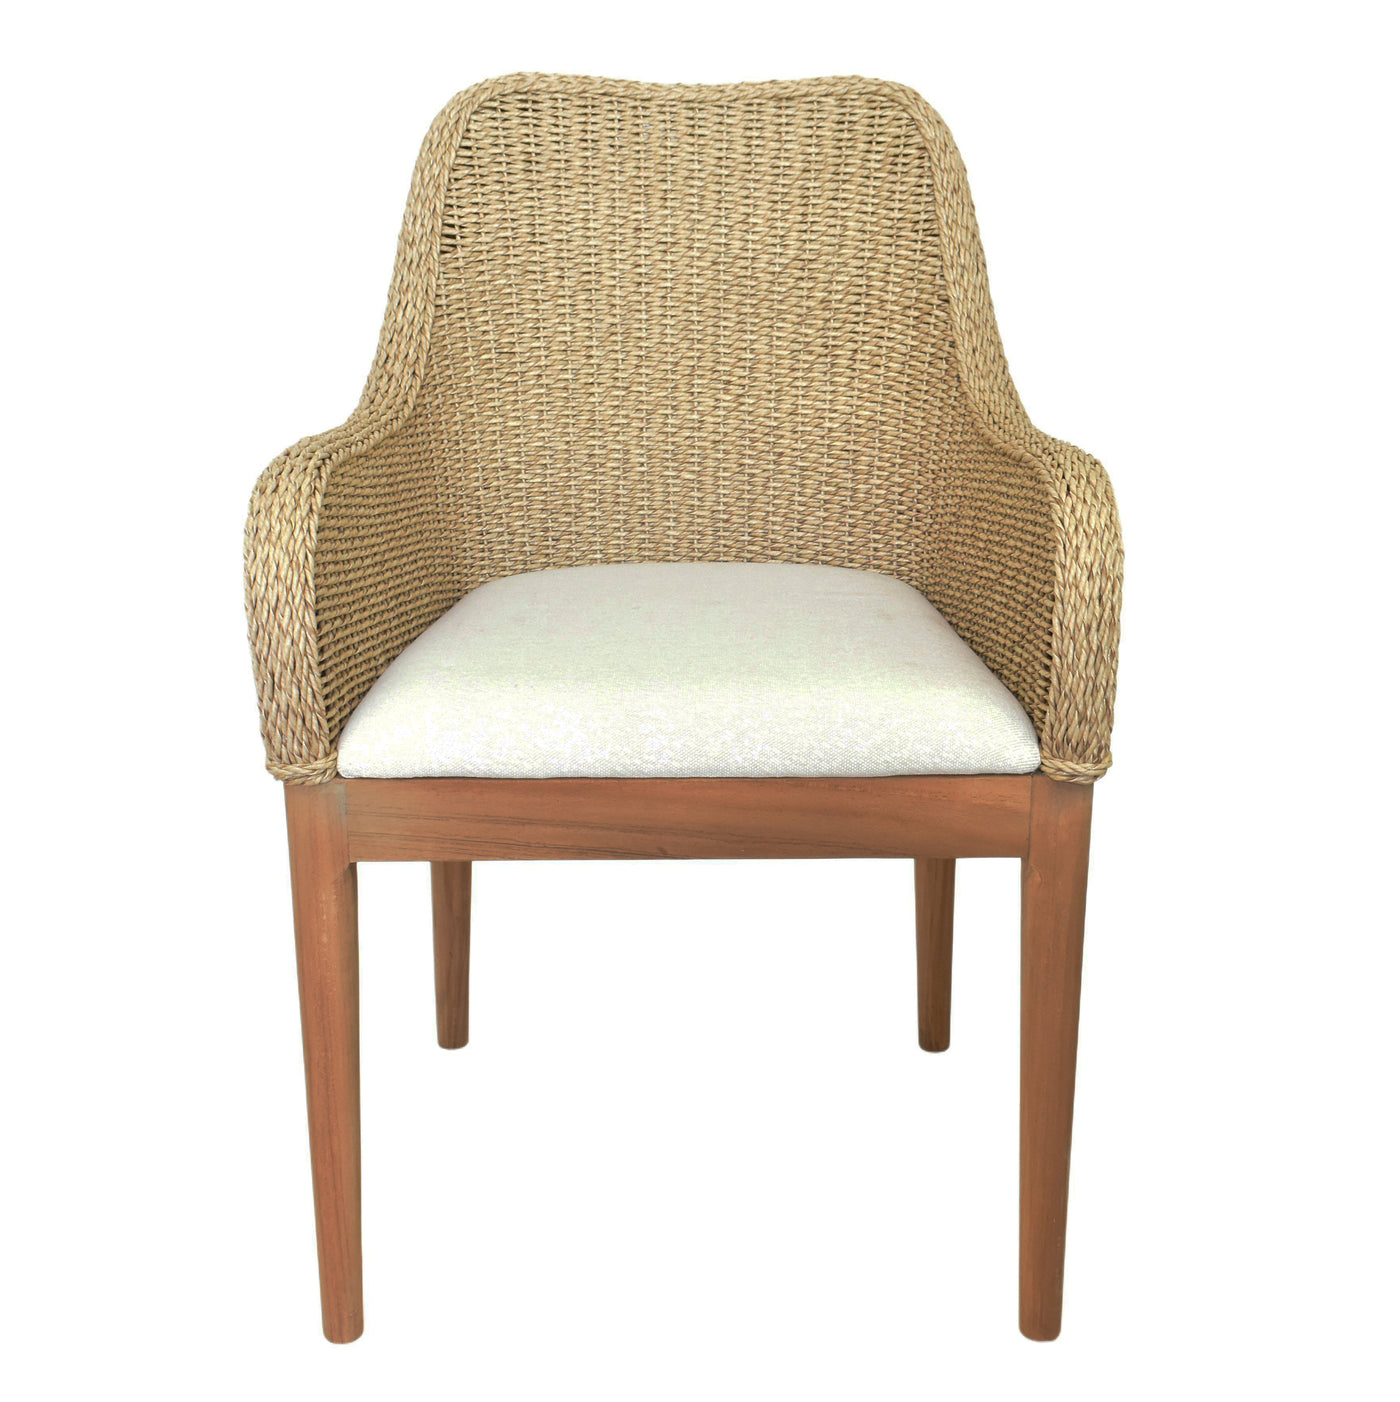 Tula Natural Rattan Outdoor Dining Chair